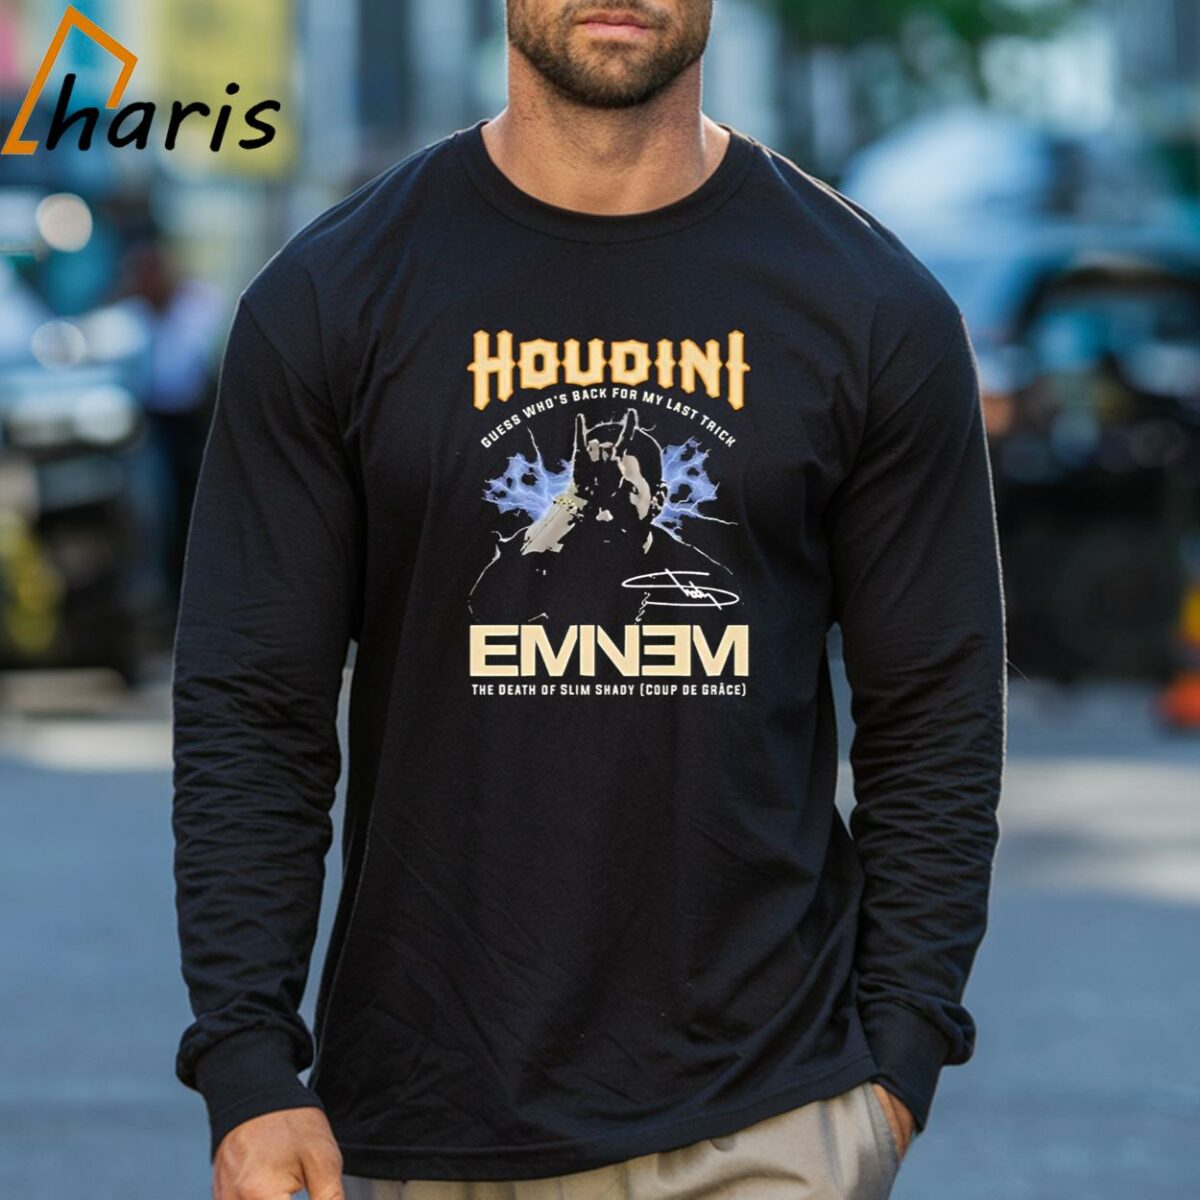 Houdini Guess Whos Back For My Last Trick Eminem The Death Of Slim Shady Vintage T Shirt 3 Long sleeve shirt